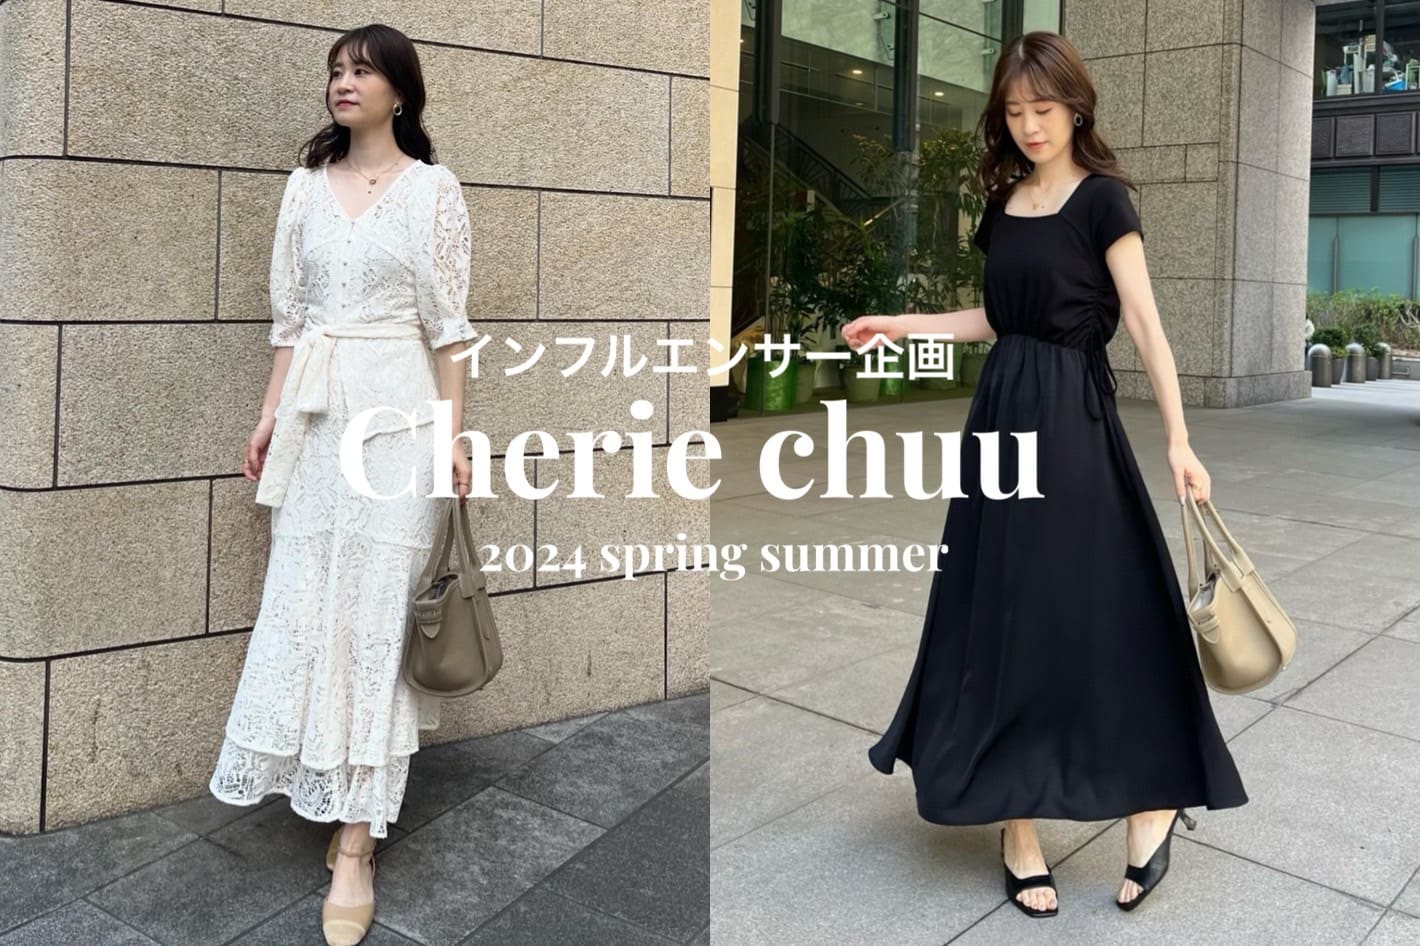 one after another NICE CLAUP インフルエンサーブランド『Cherie chuu』通常販売スタート